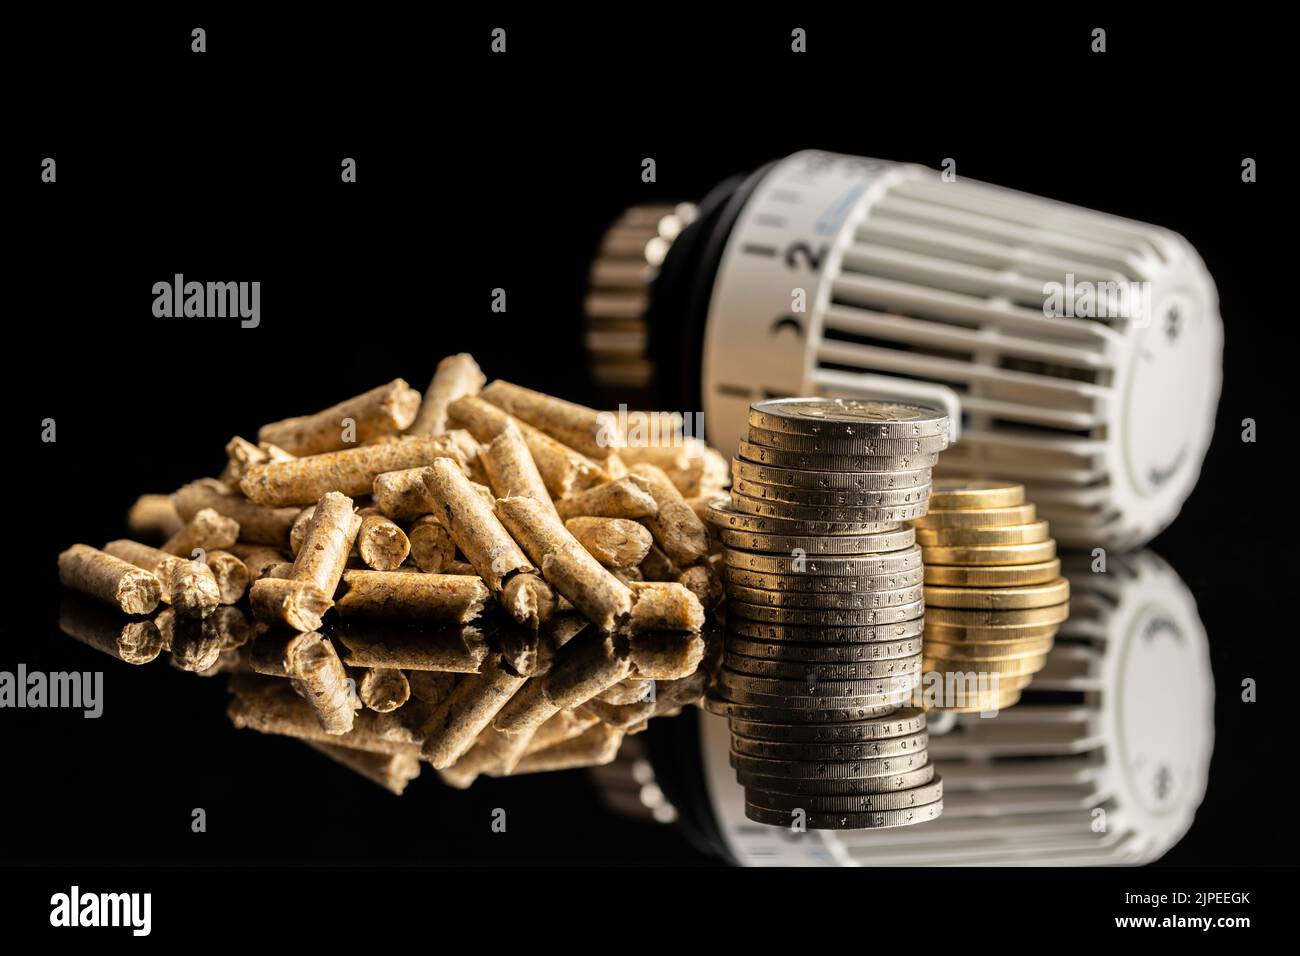 Wooden pellets, coins and thermostatic valve head on black background. Biomass - Renewable source of heating. Stock Photo